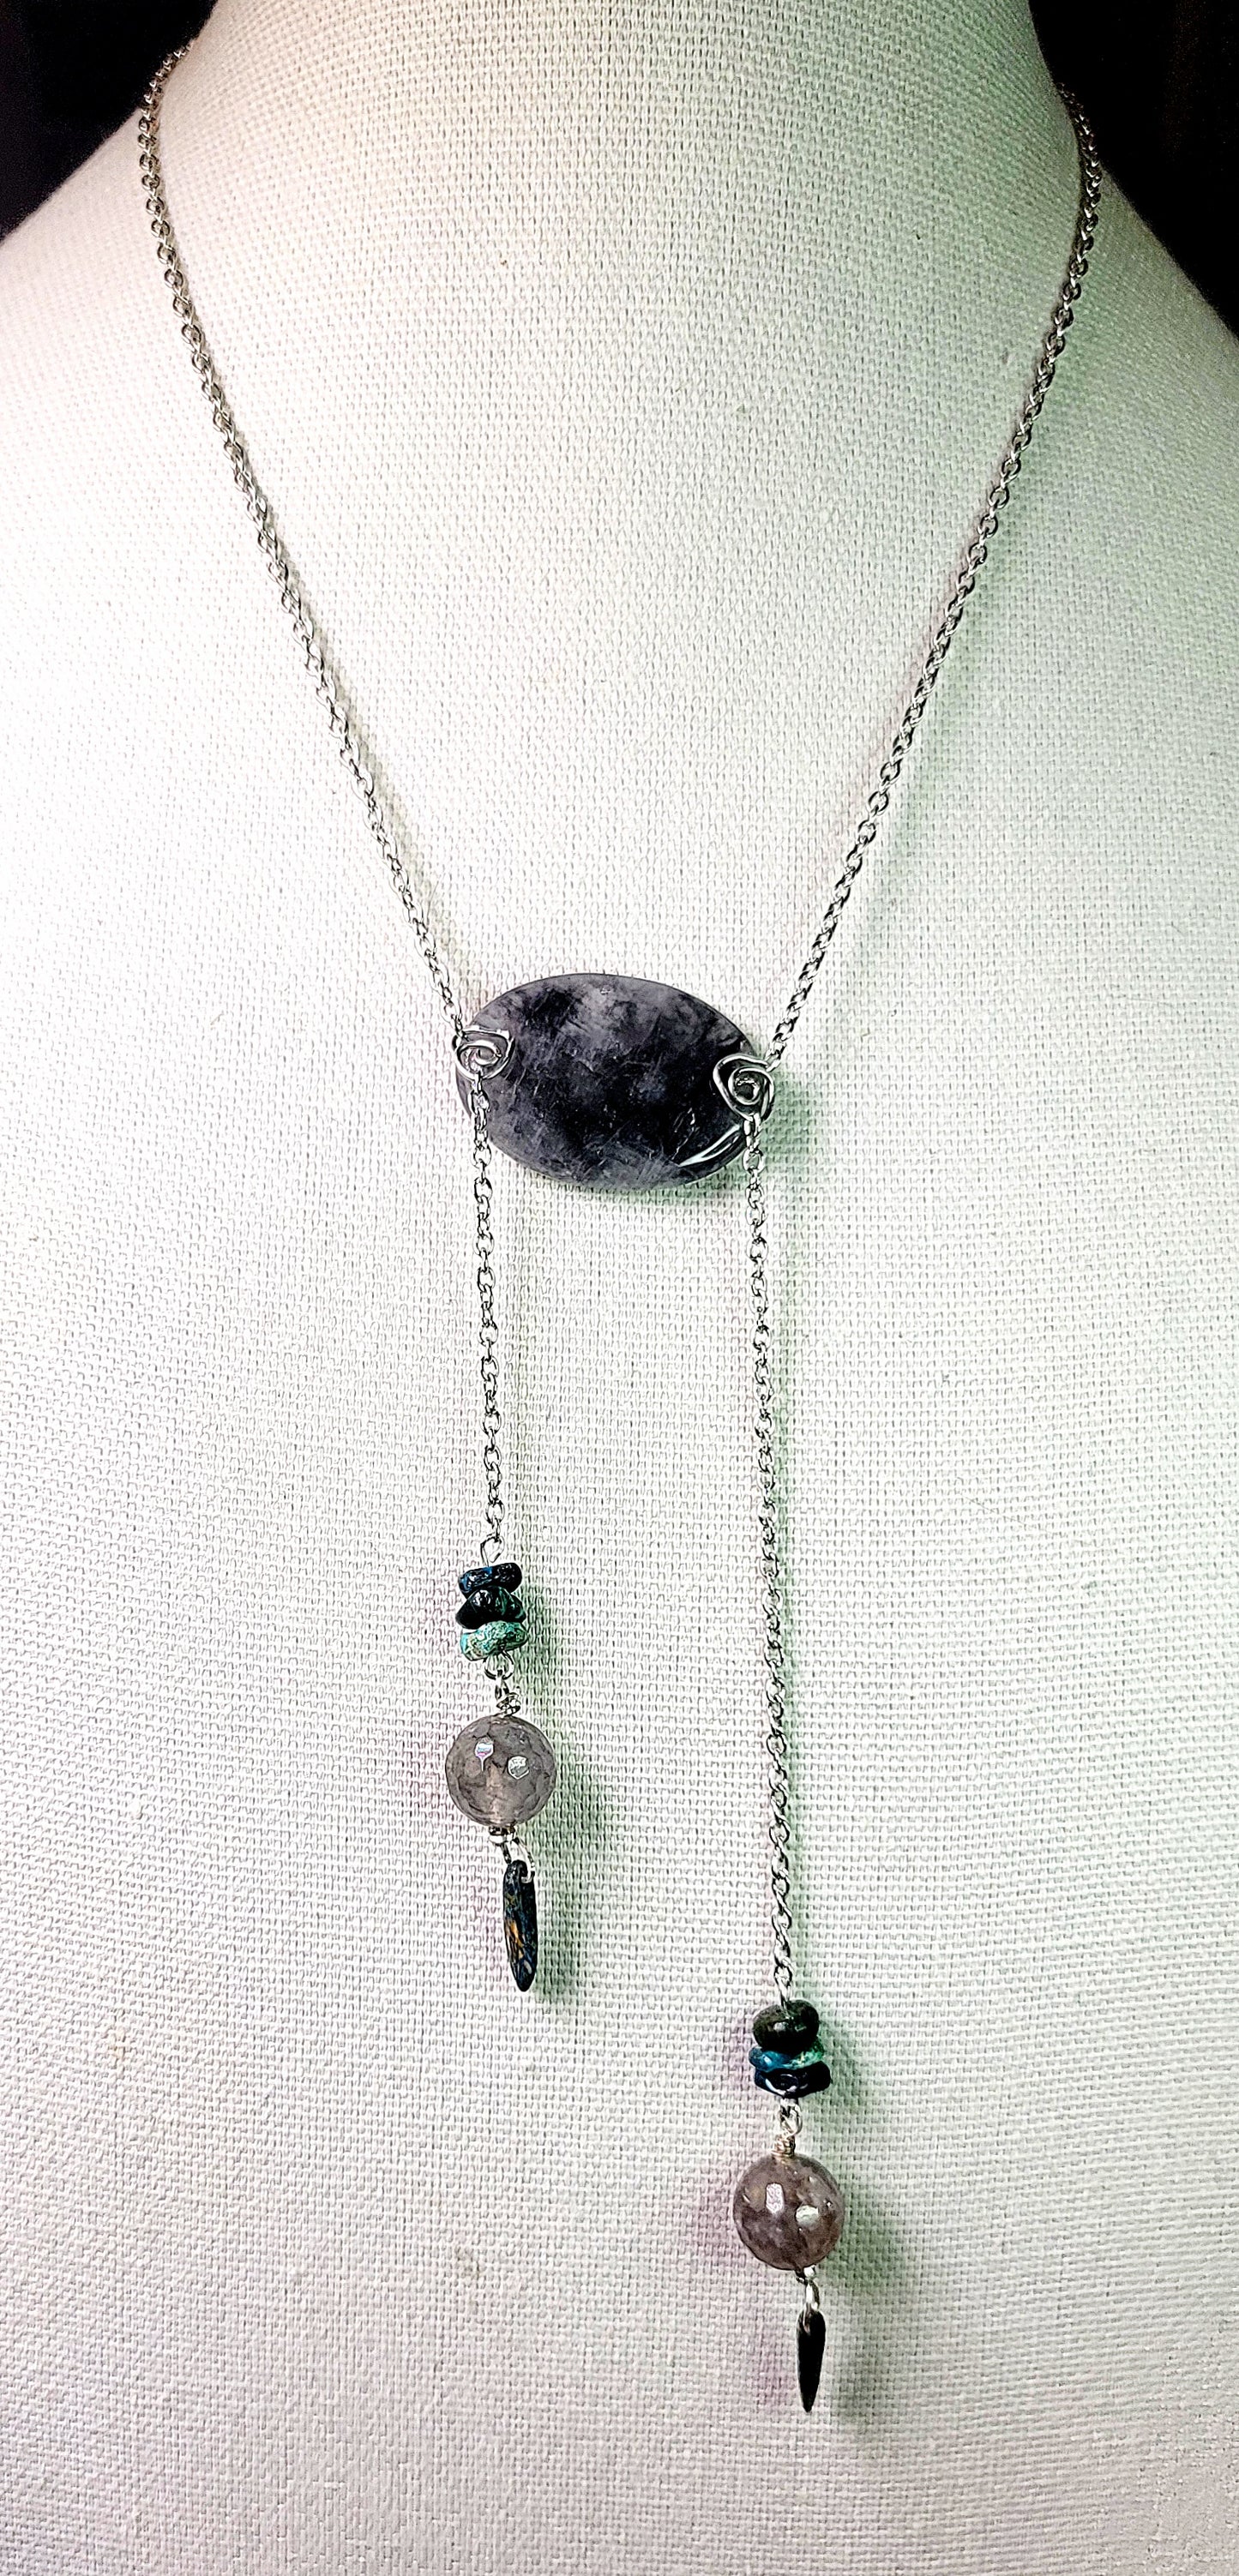 Necklace - Quartz and Turquoise with Silver chain